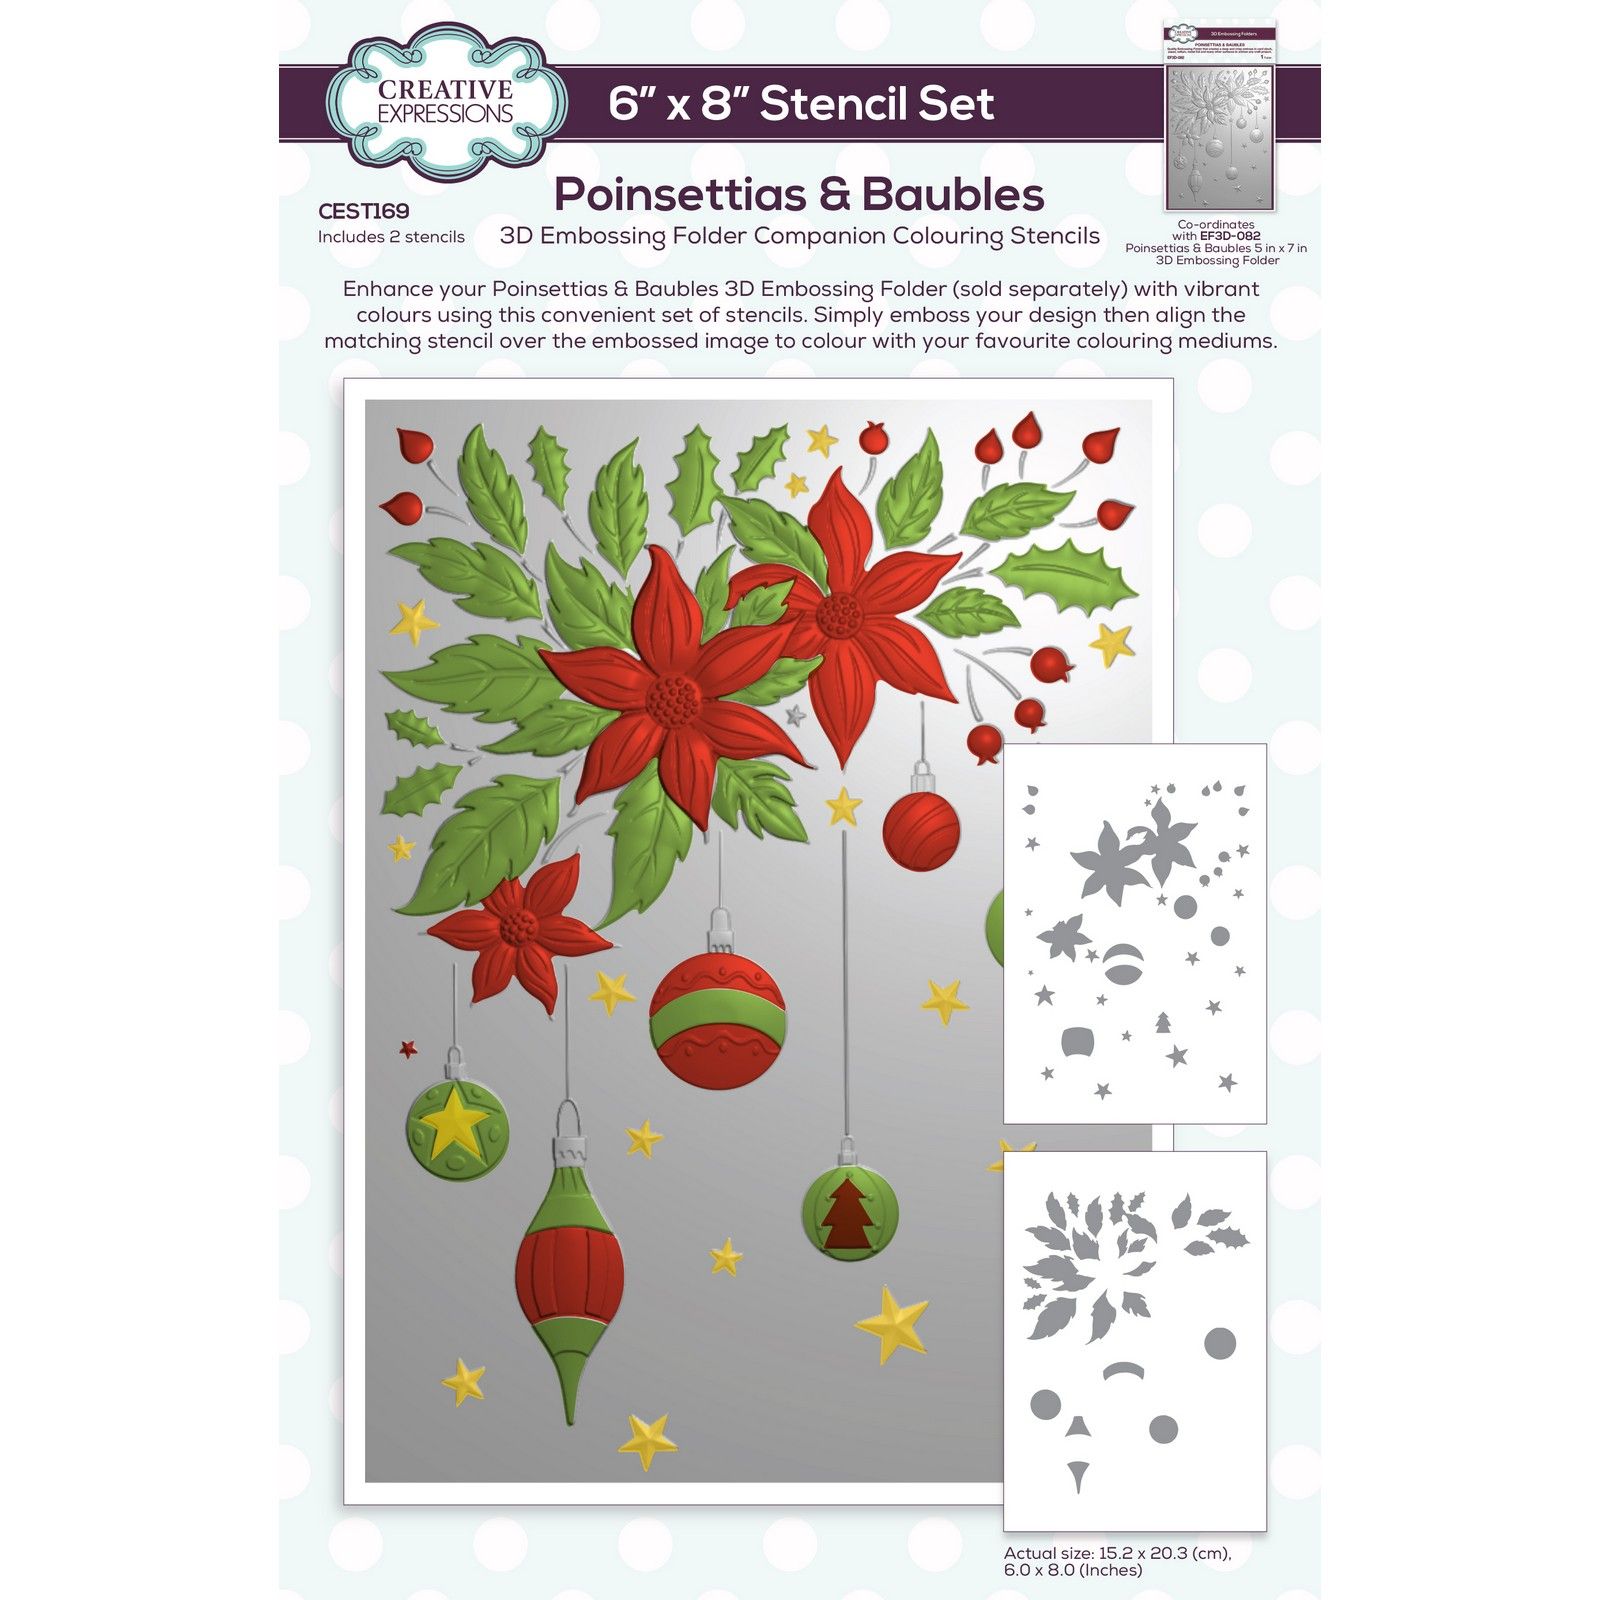 Creative Expressions • Poinsettias & Baubles Companion Colouring Stencil 6 in x 8 in Set of 2